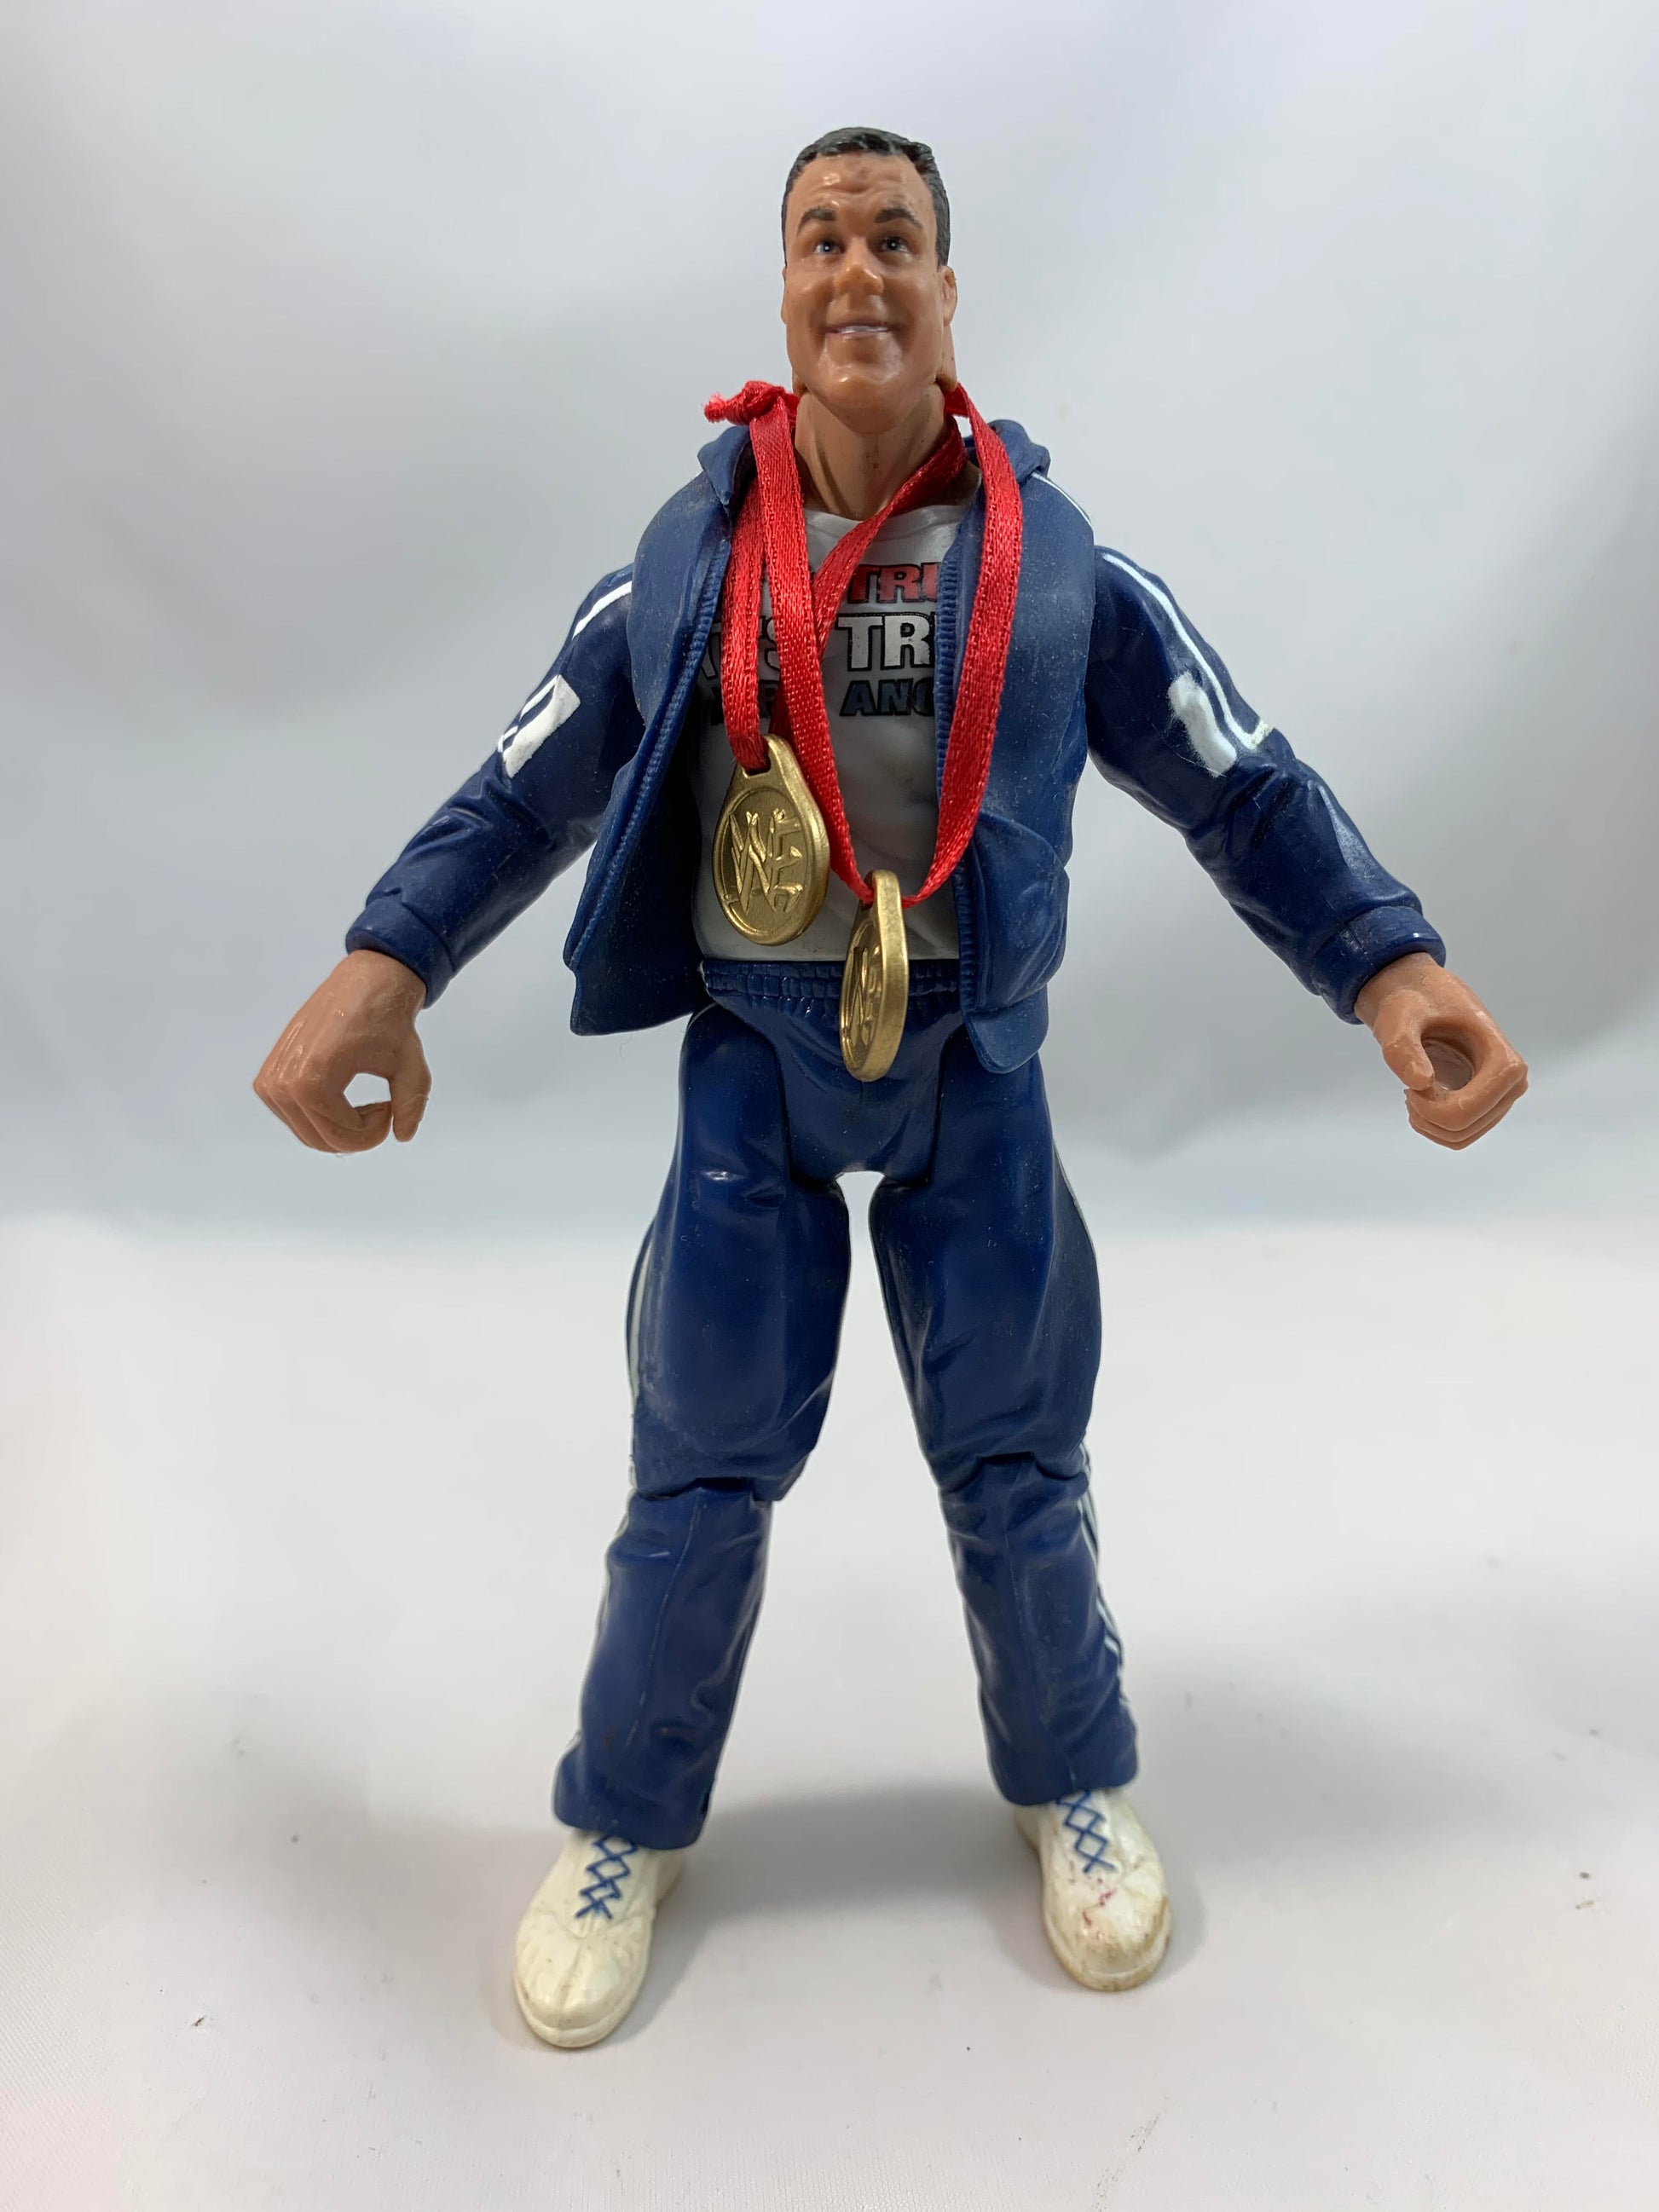 Jakks Pacific TNA Kurt Angle 2000 Series with tracksuit and medals - Loose